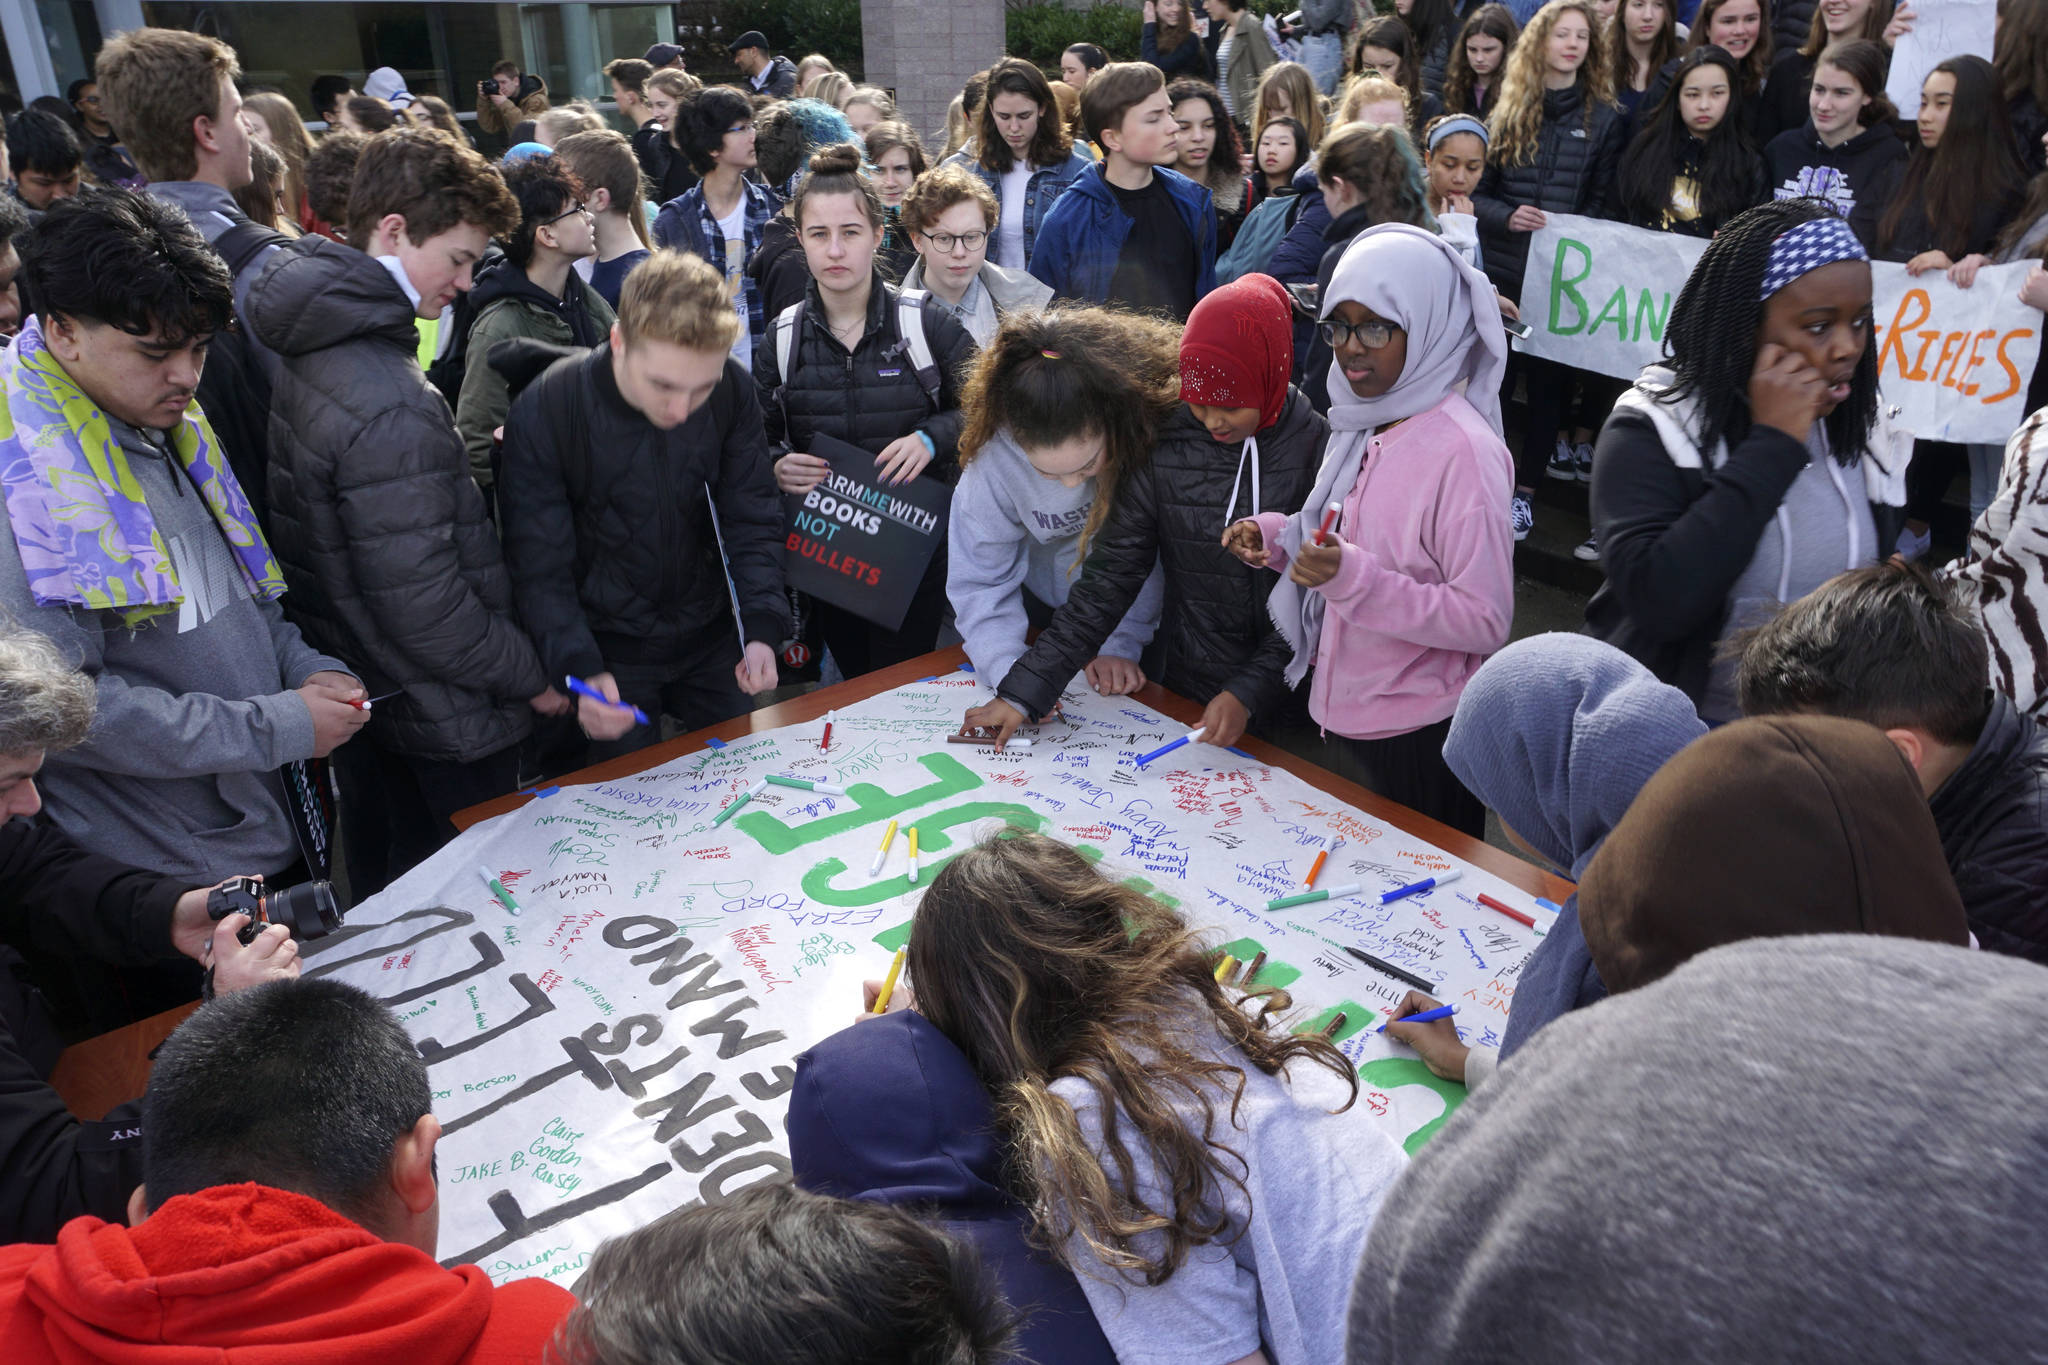 During the walkout, Garfield High School students sign a poster that will be delivered to politicians. Photo by Melissa Hellmann